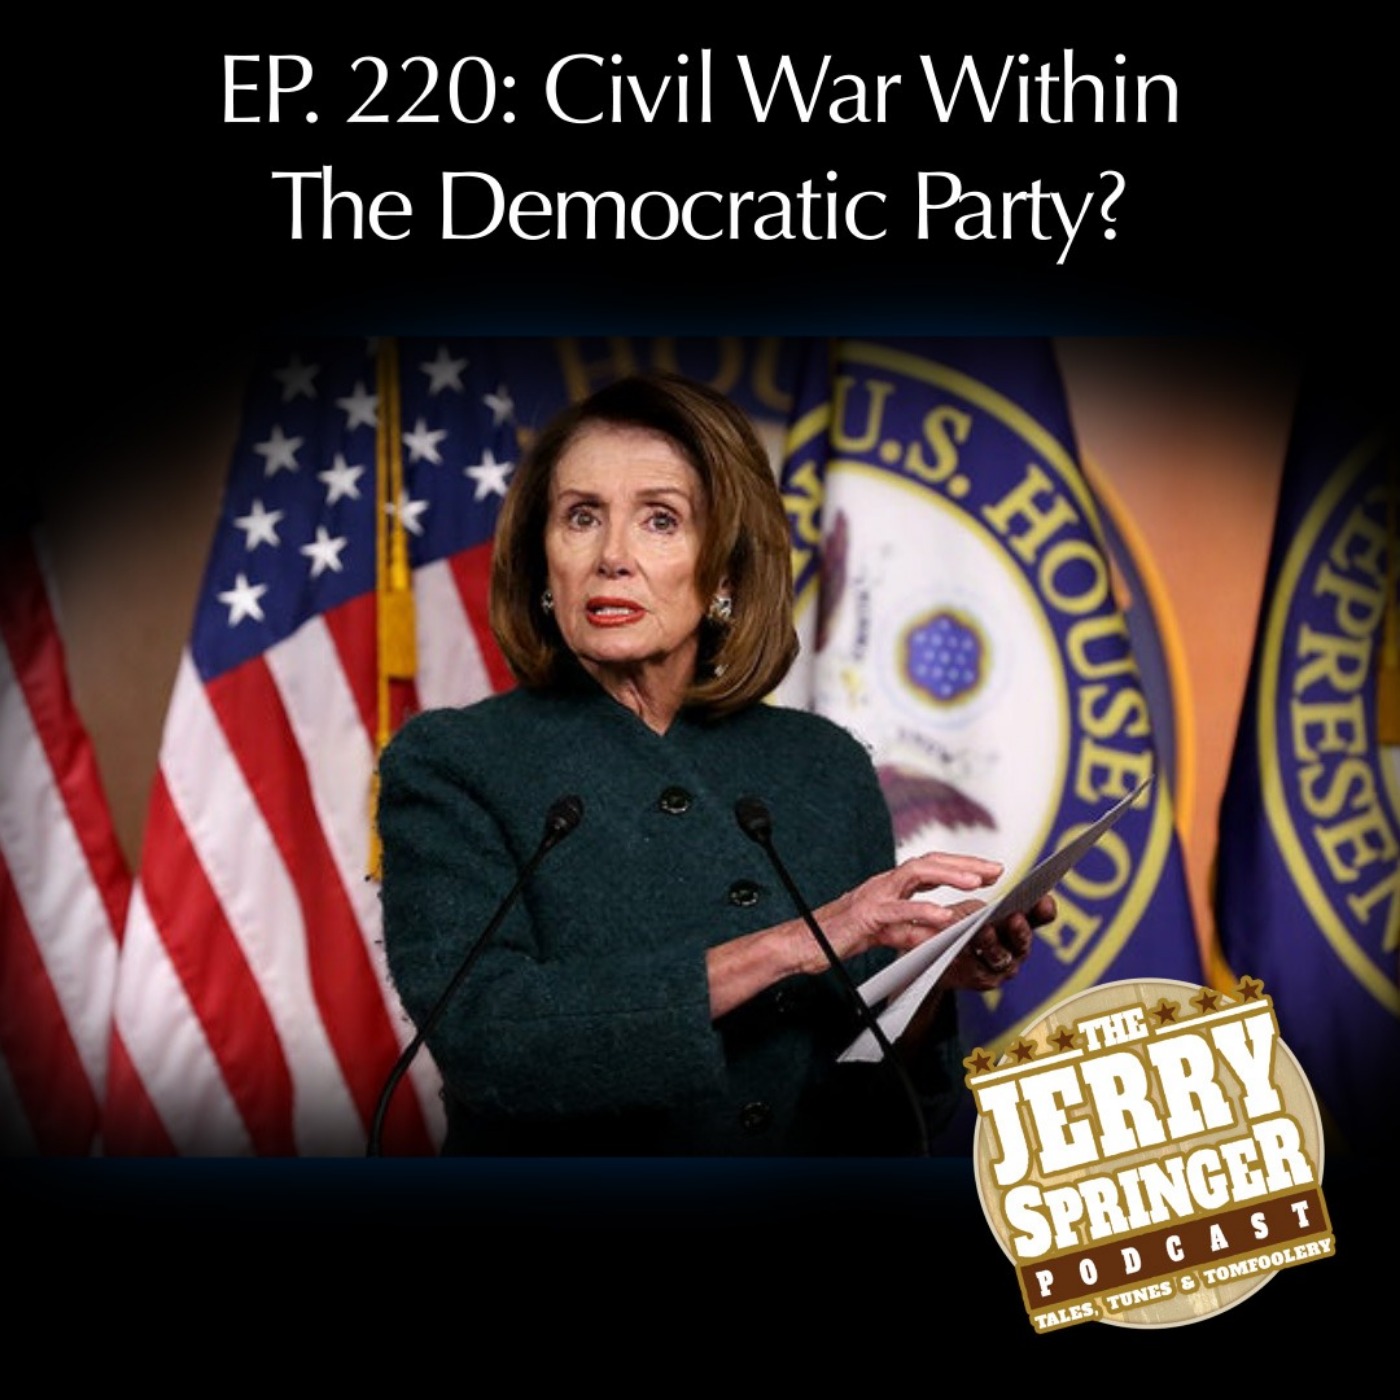 Civil War Within the Democratic Party? - EP 220